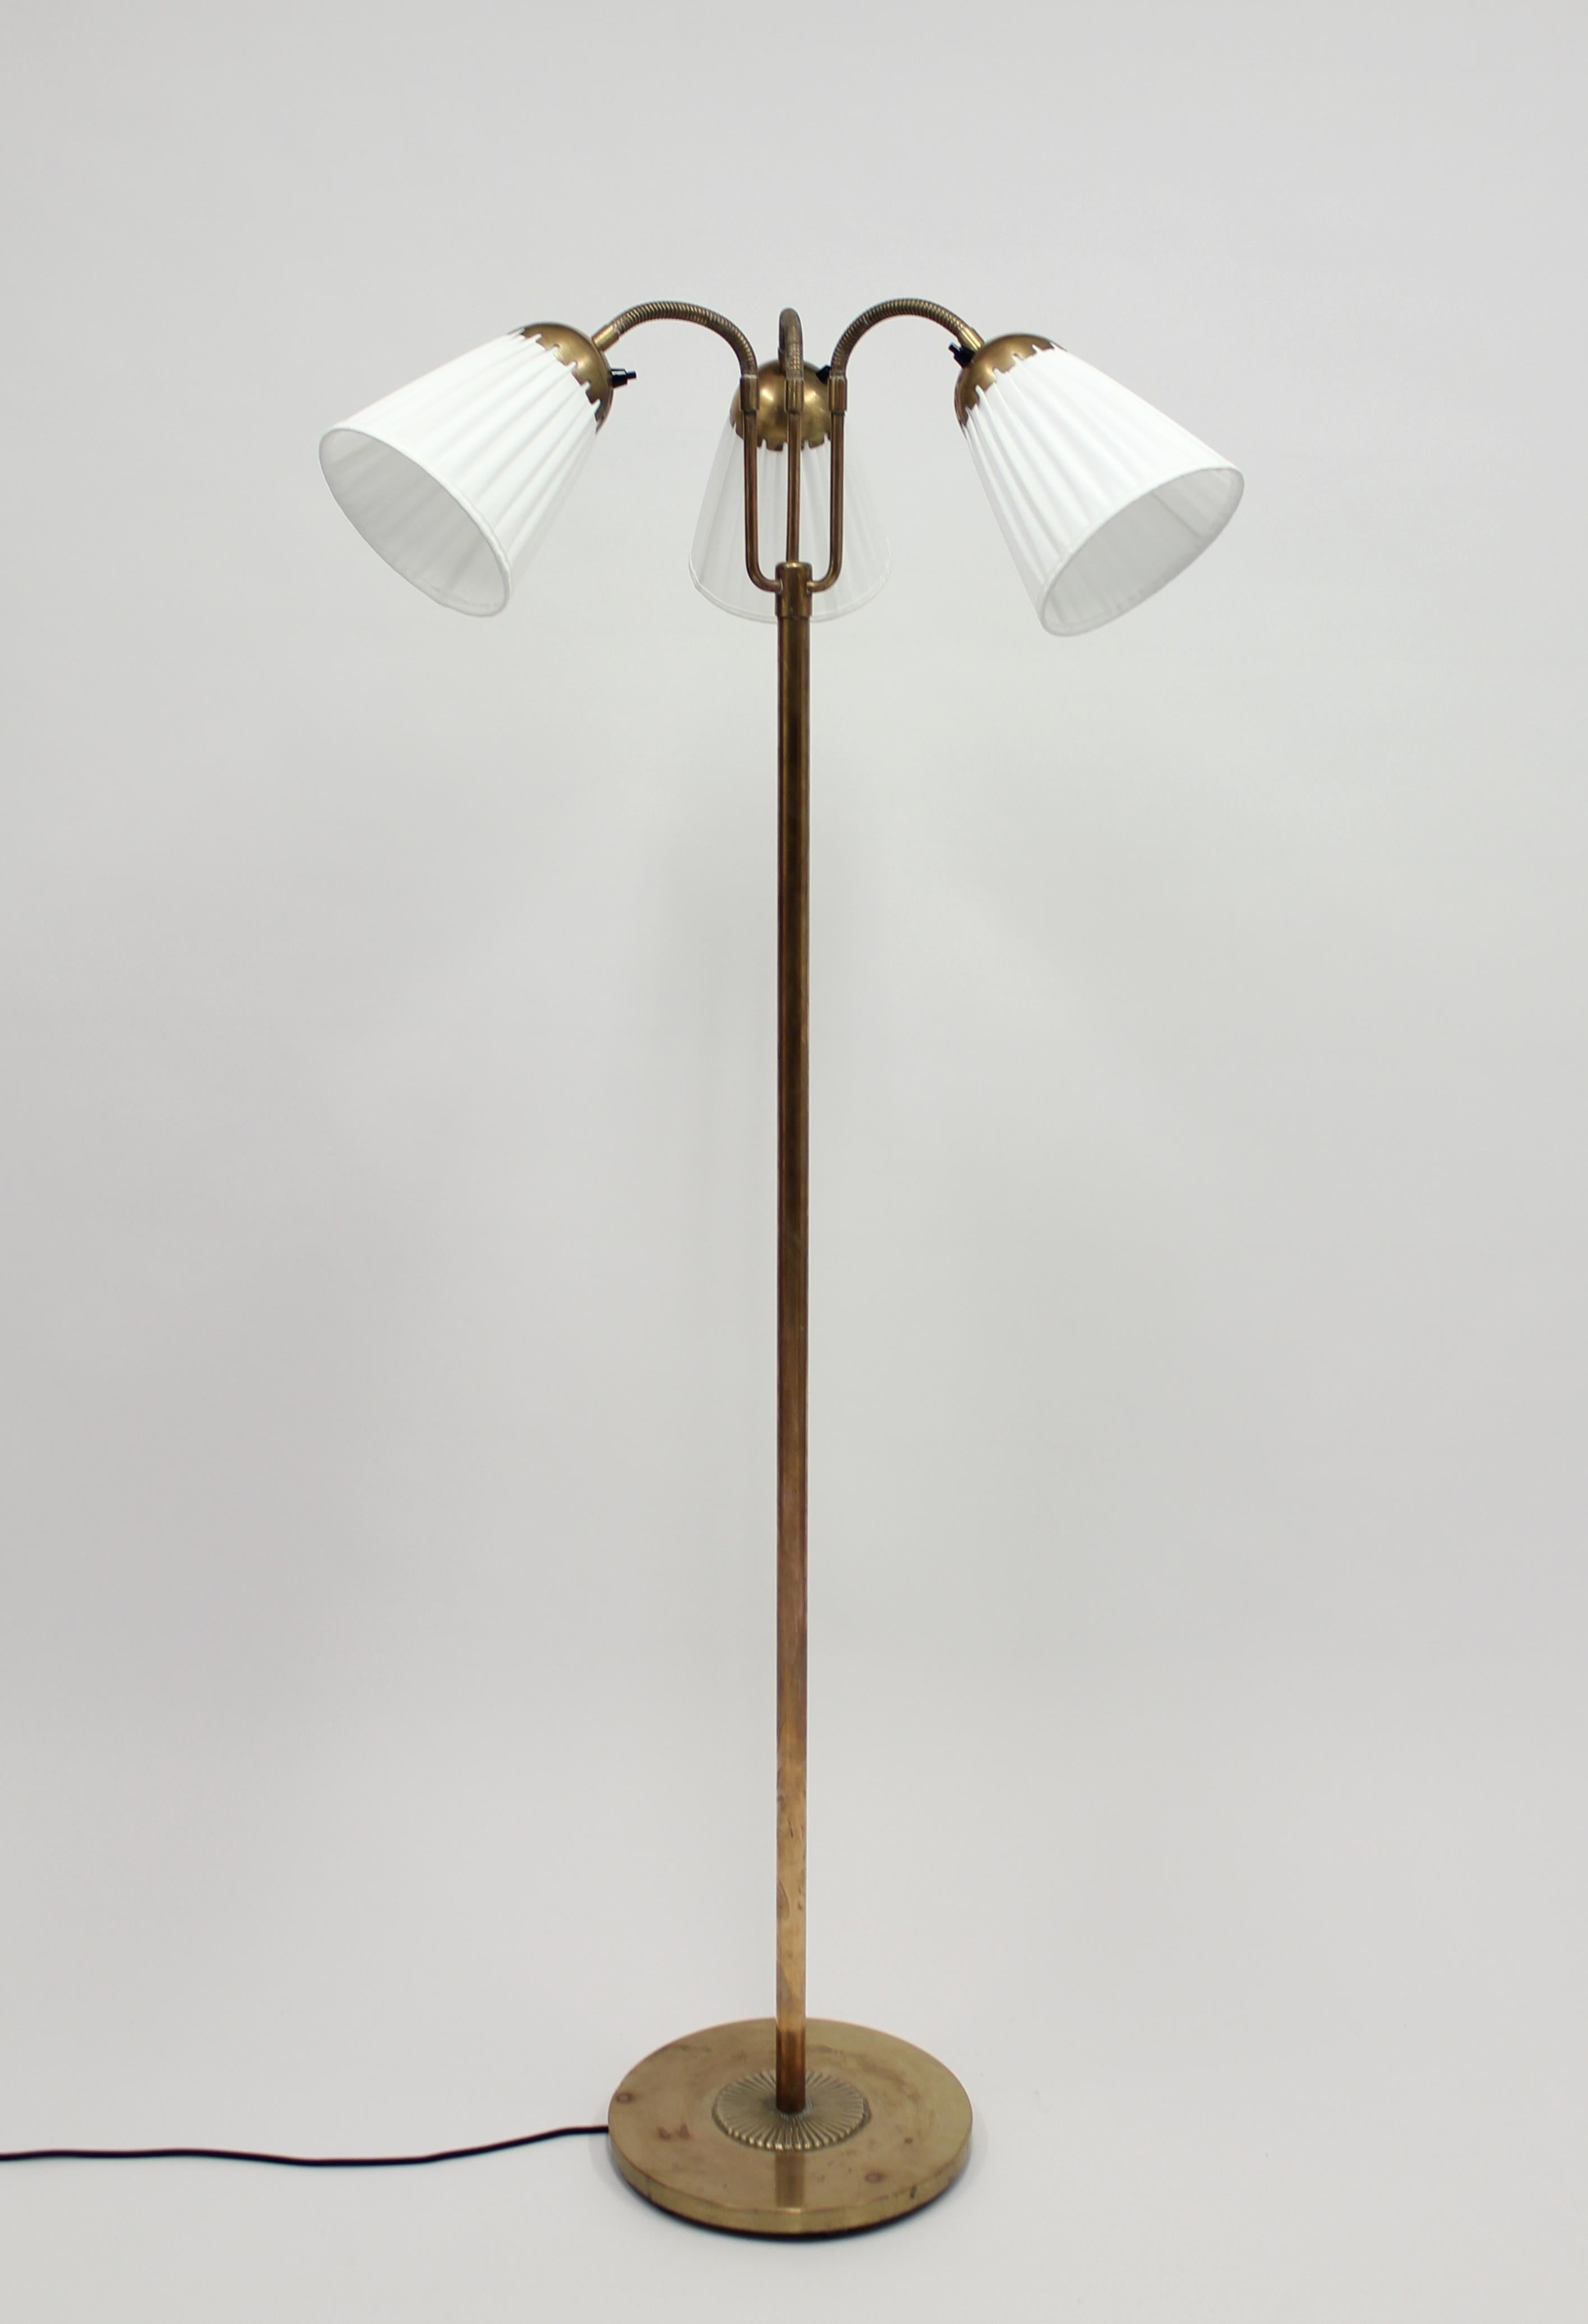 1940s brass three-light floor lamp with pleated shades on so called goose neck arms. Most likely made in Sweden. This is a very good example of the so called 